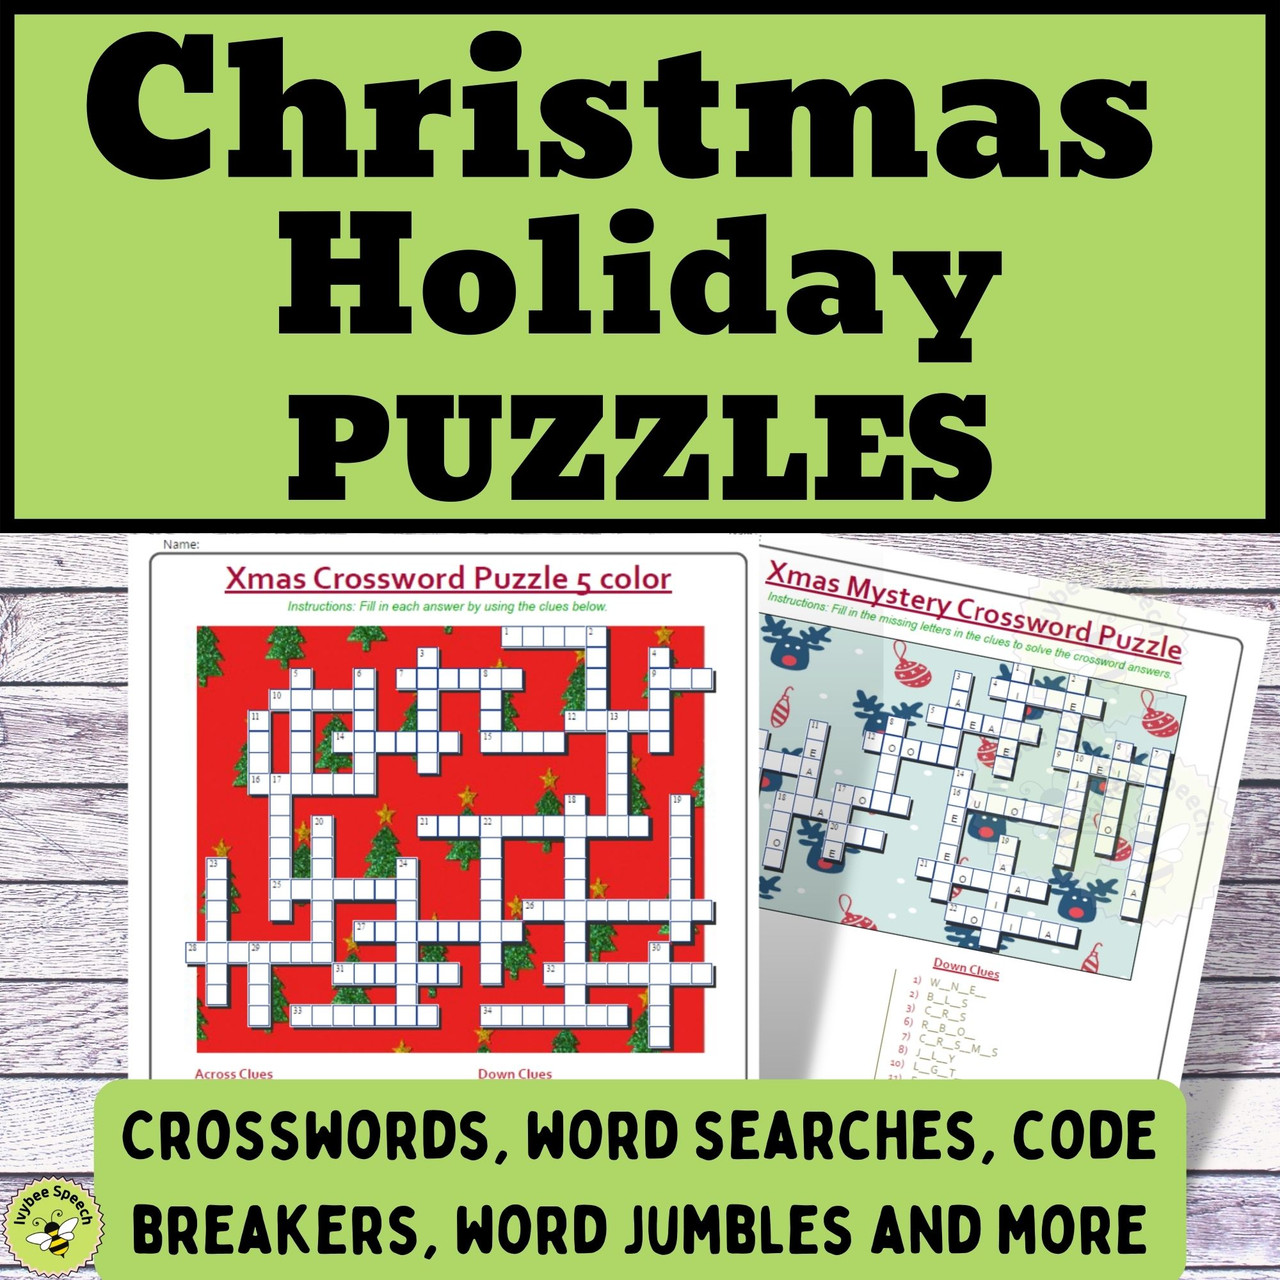 Christmas Holiday Puzzles Crosswords, Word Searches, Code Breakers, Jumbles, and More